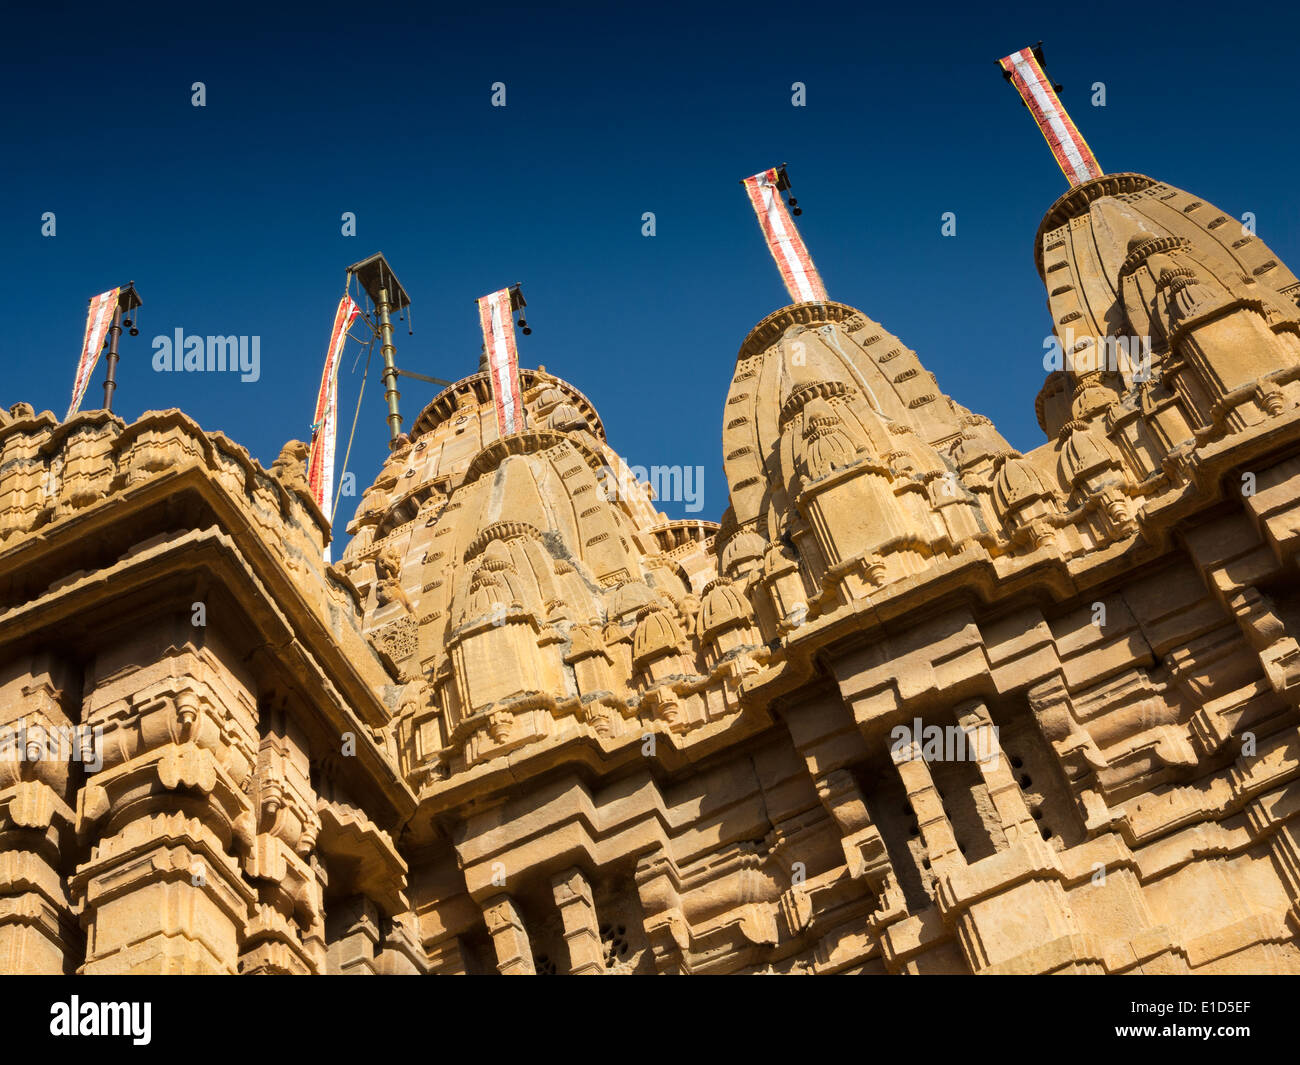 India, Rajasthan, Jaisalmer, Fort, Jain Temple architectural detail of towers against blue sky Stock Photo